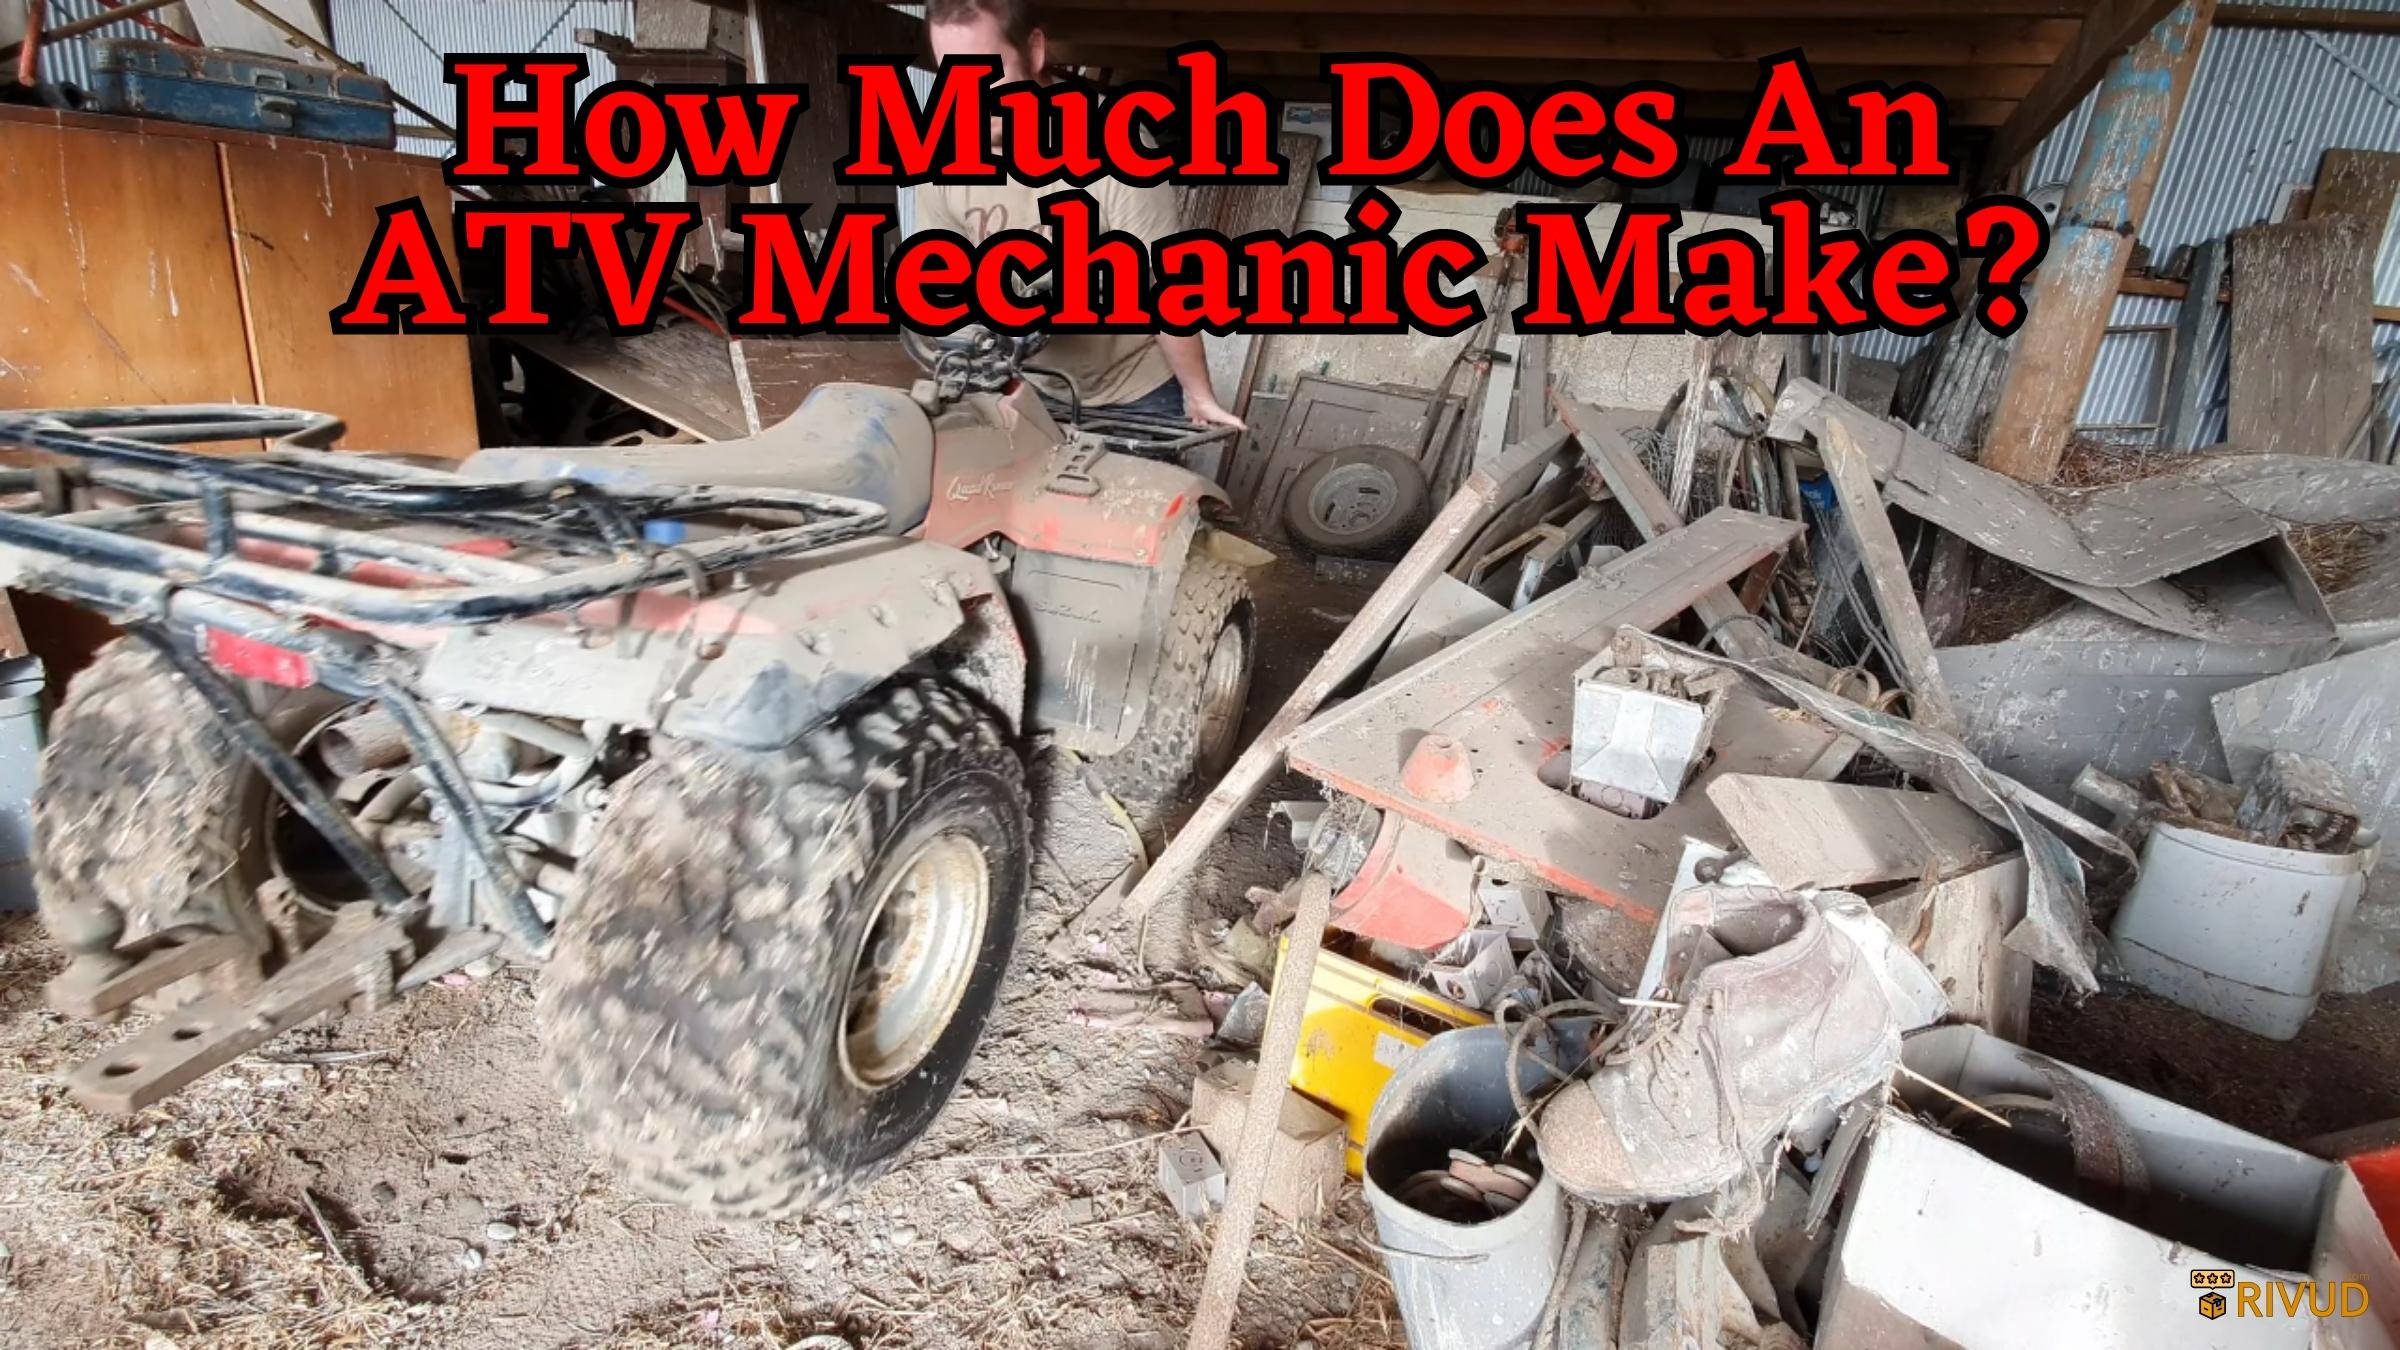 How Much Does An Atv Mechanic Make?